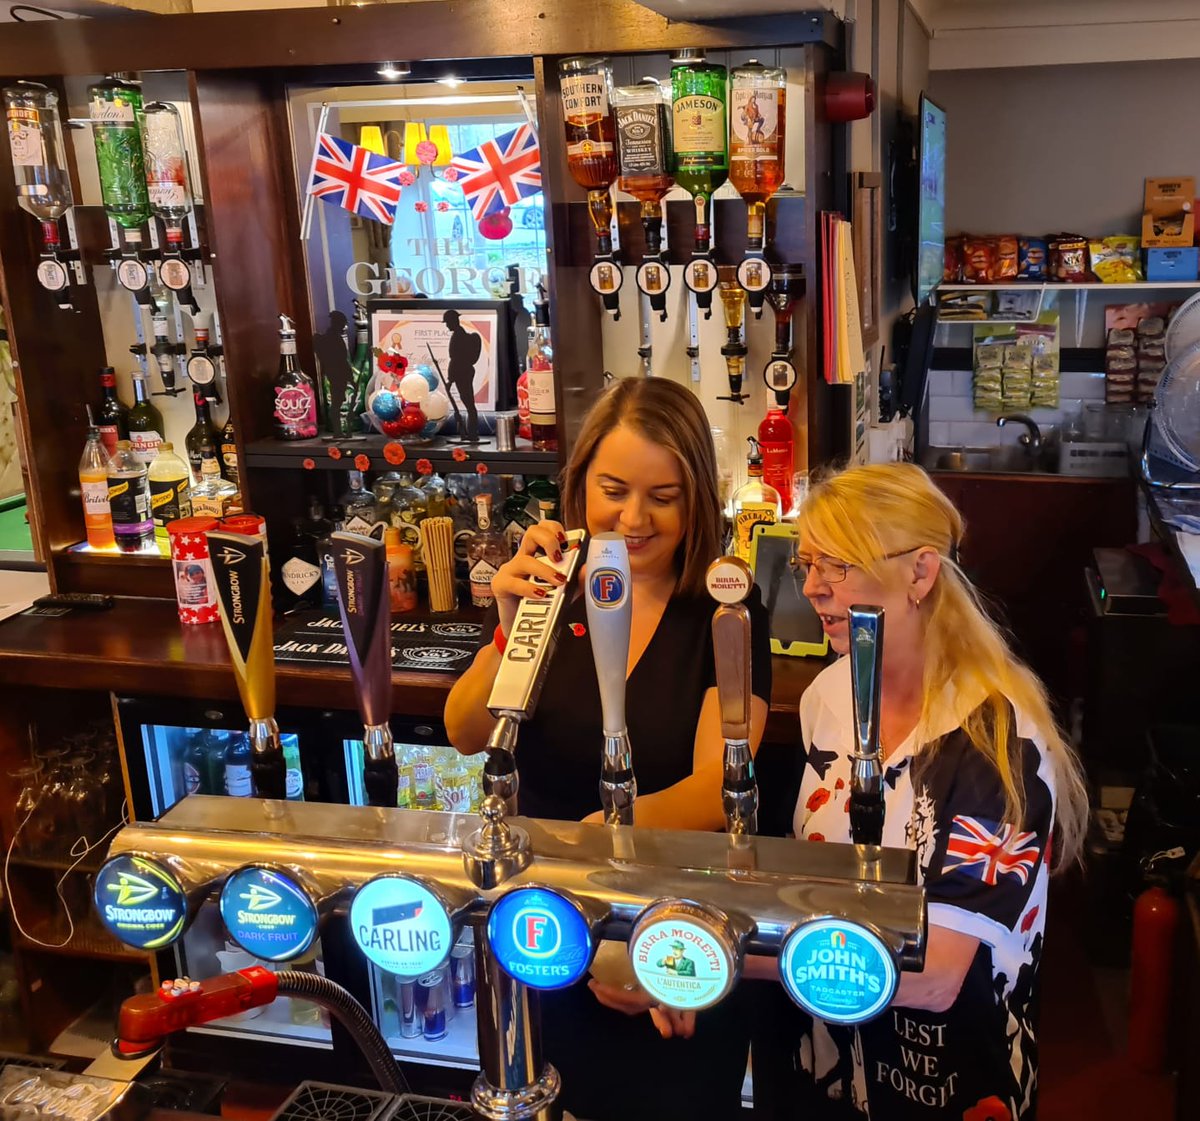 Great to pop into the newly refurbished The George in Wombwell. 

Nice to chat to Dawn about her local business. I had a go at pulling a pint… https://t.co/rqDNfR6PN3